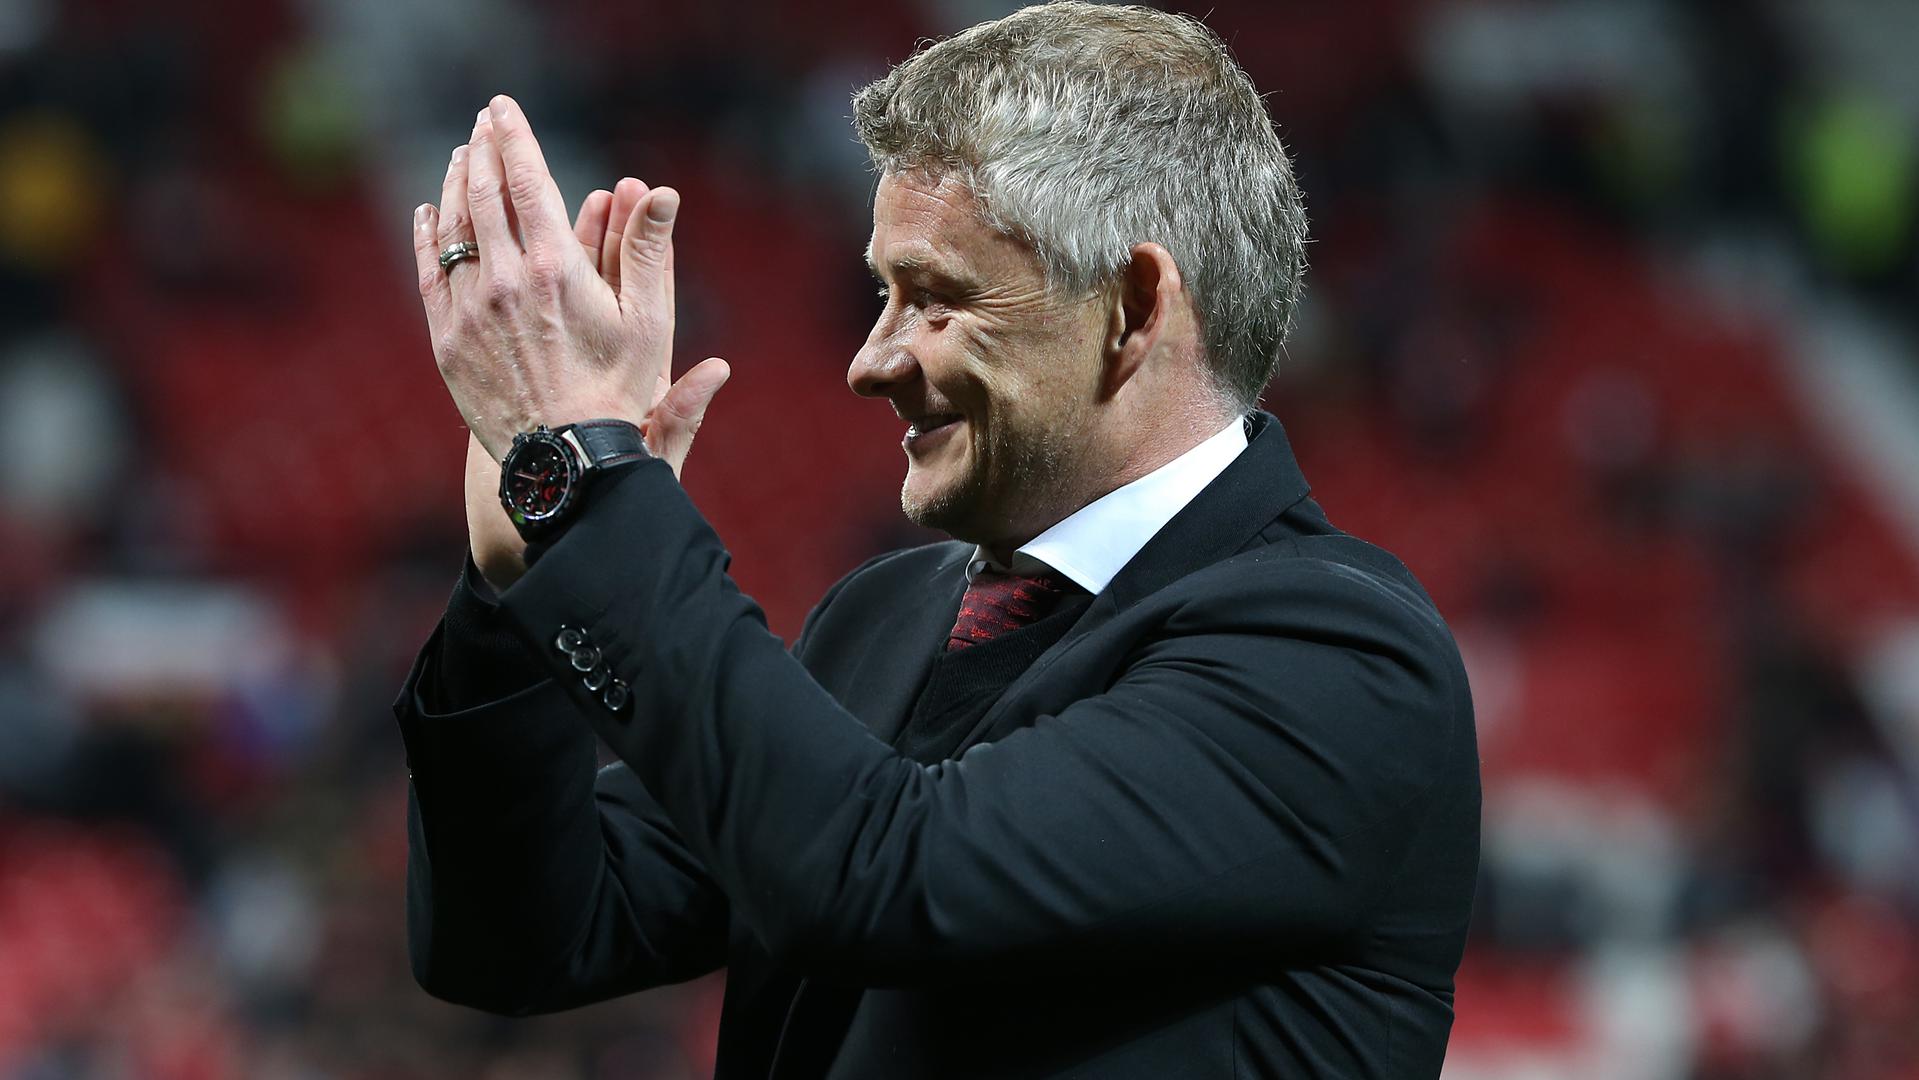 Manchester United boss Ole Gunnar Solskjaer reacts to drawing Chelsea in Carabao Cup fourth round - Bóng Đá